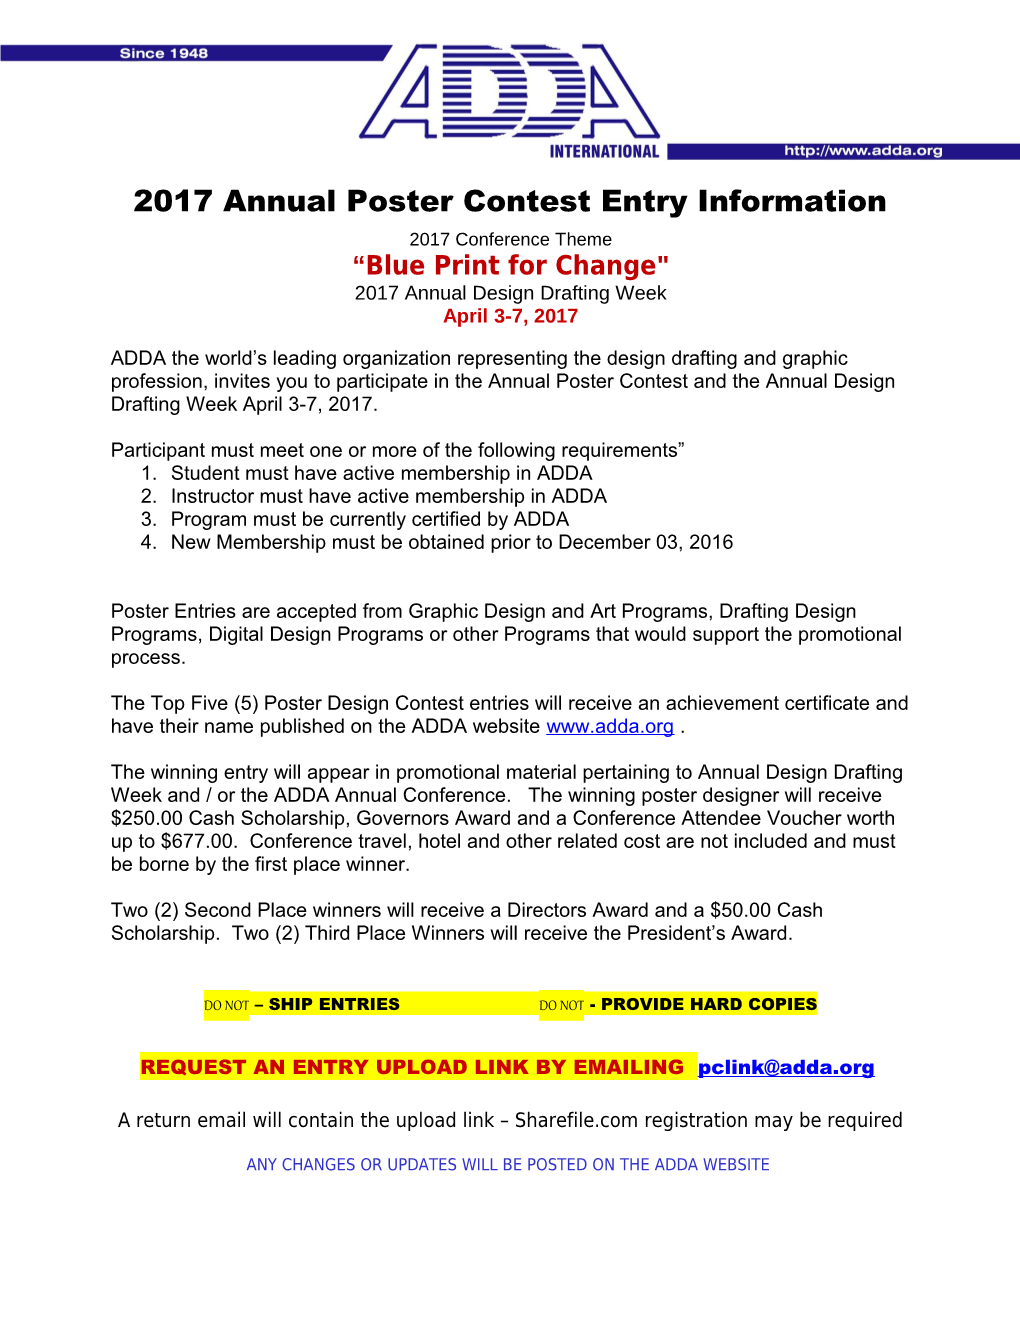 2017 Annual Poster Contest Entry Information